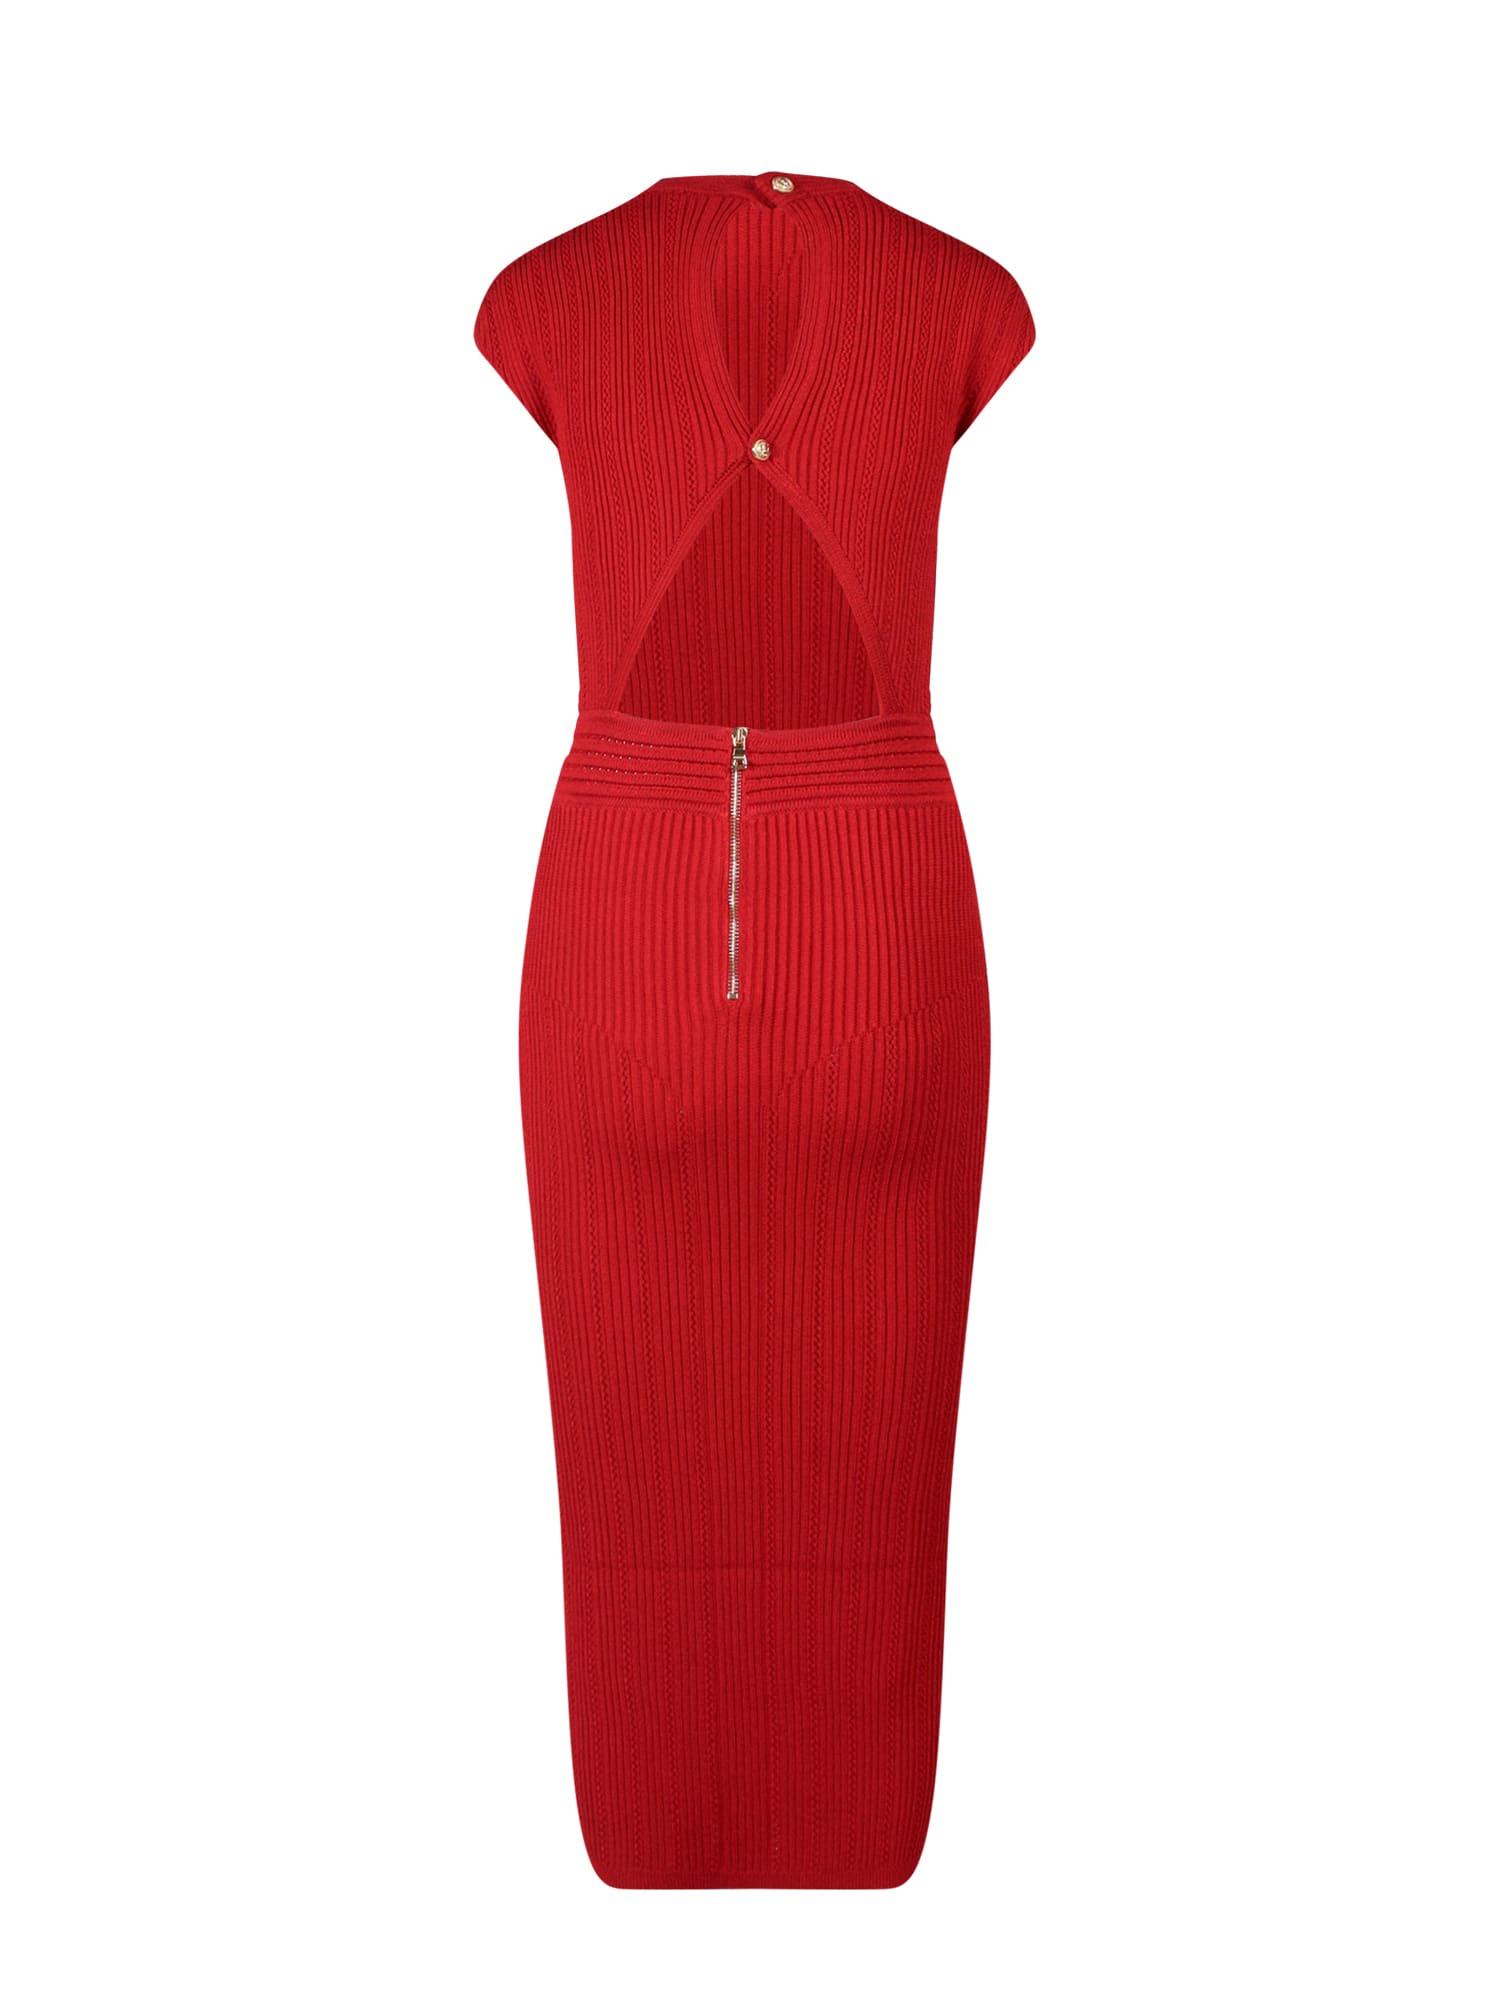 Balmain Synthetic Dress in Red | Lyst